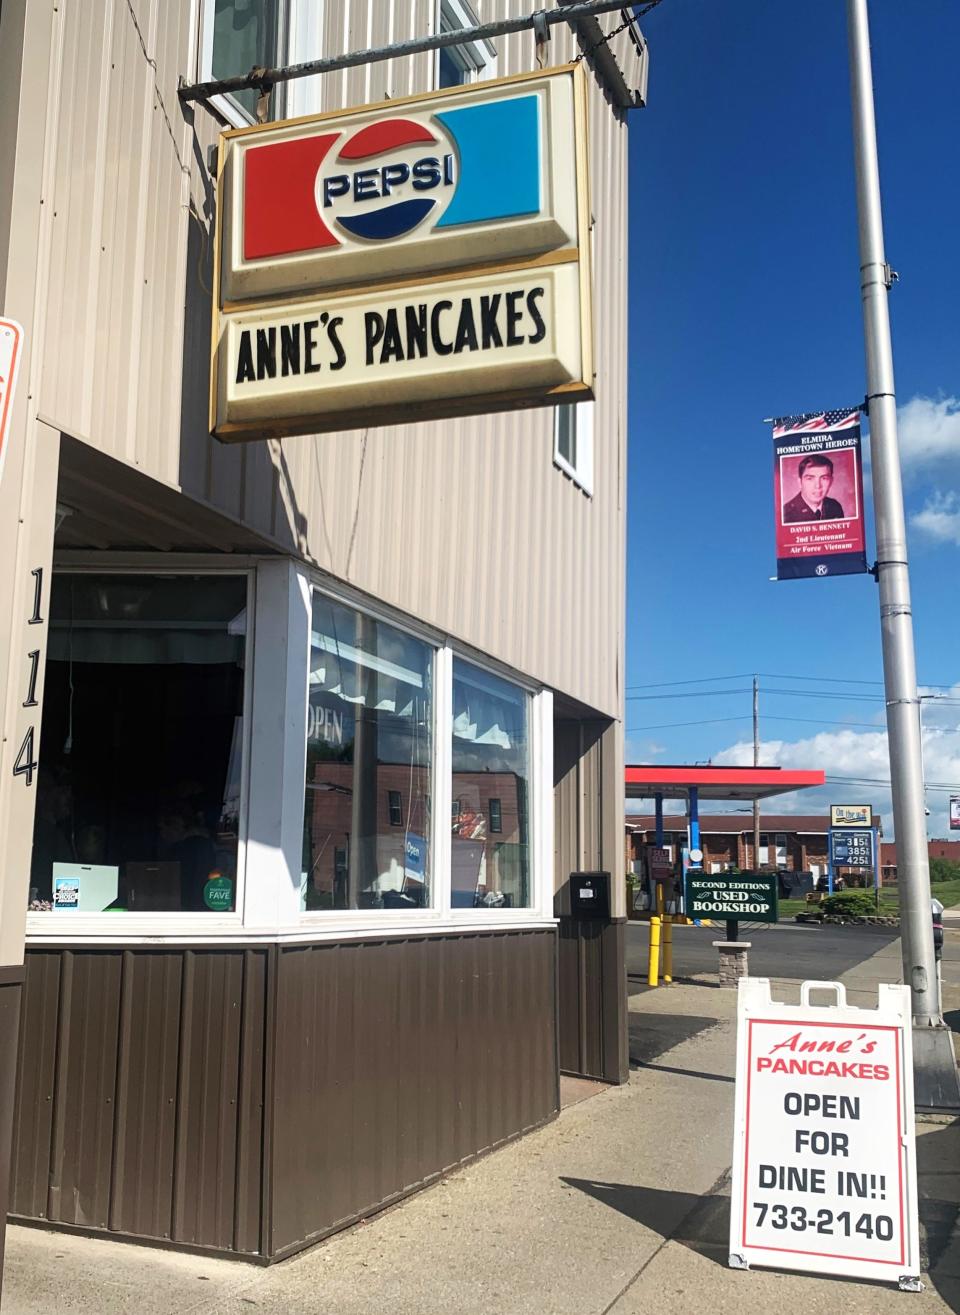 Anne's Pancakes is at 114 S Main St. in Elmira.